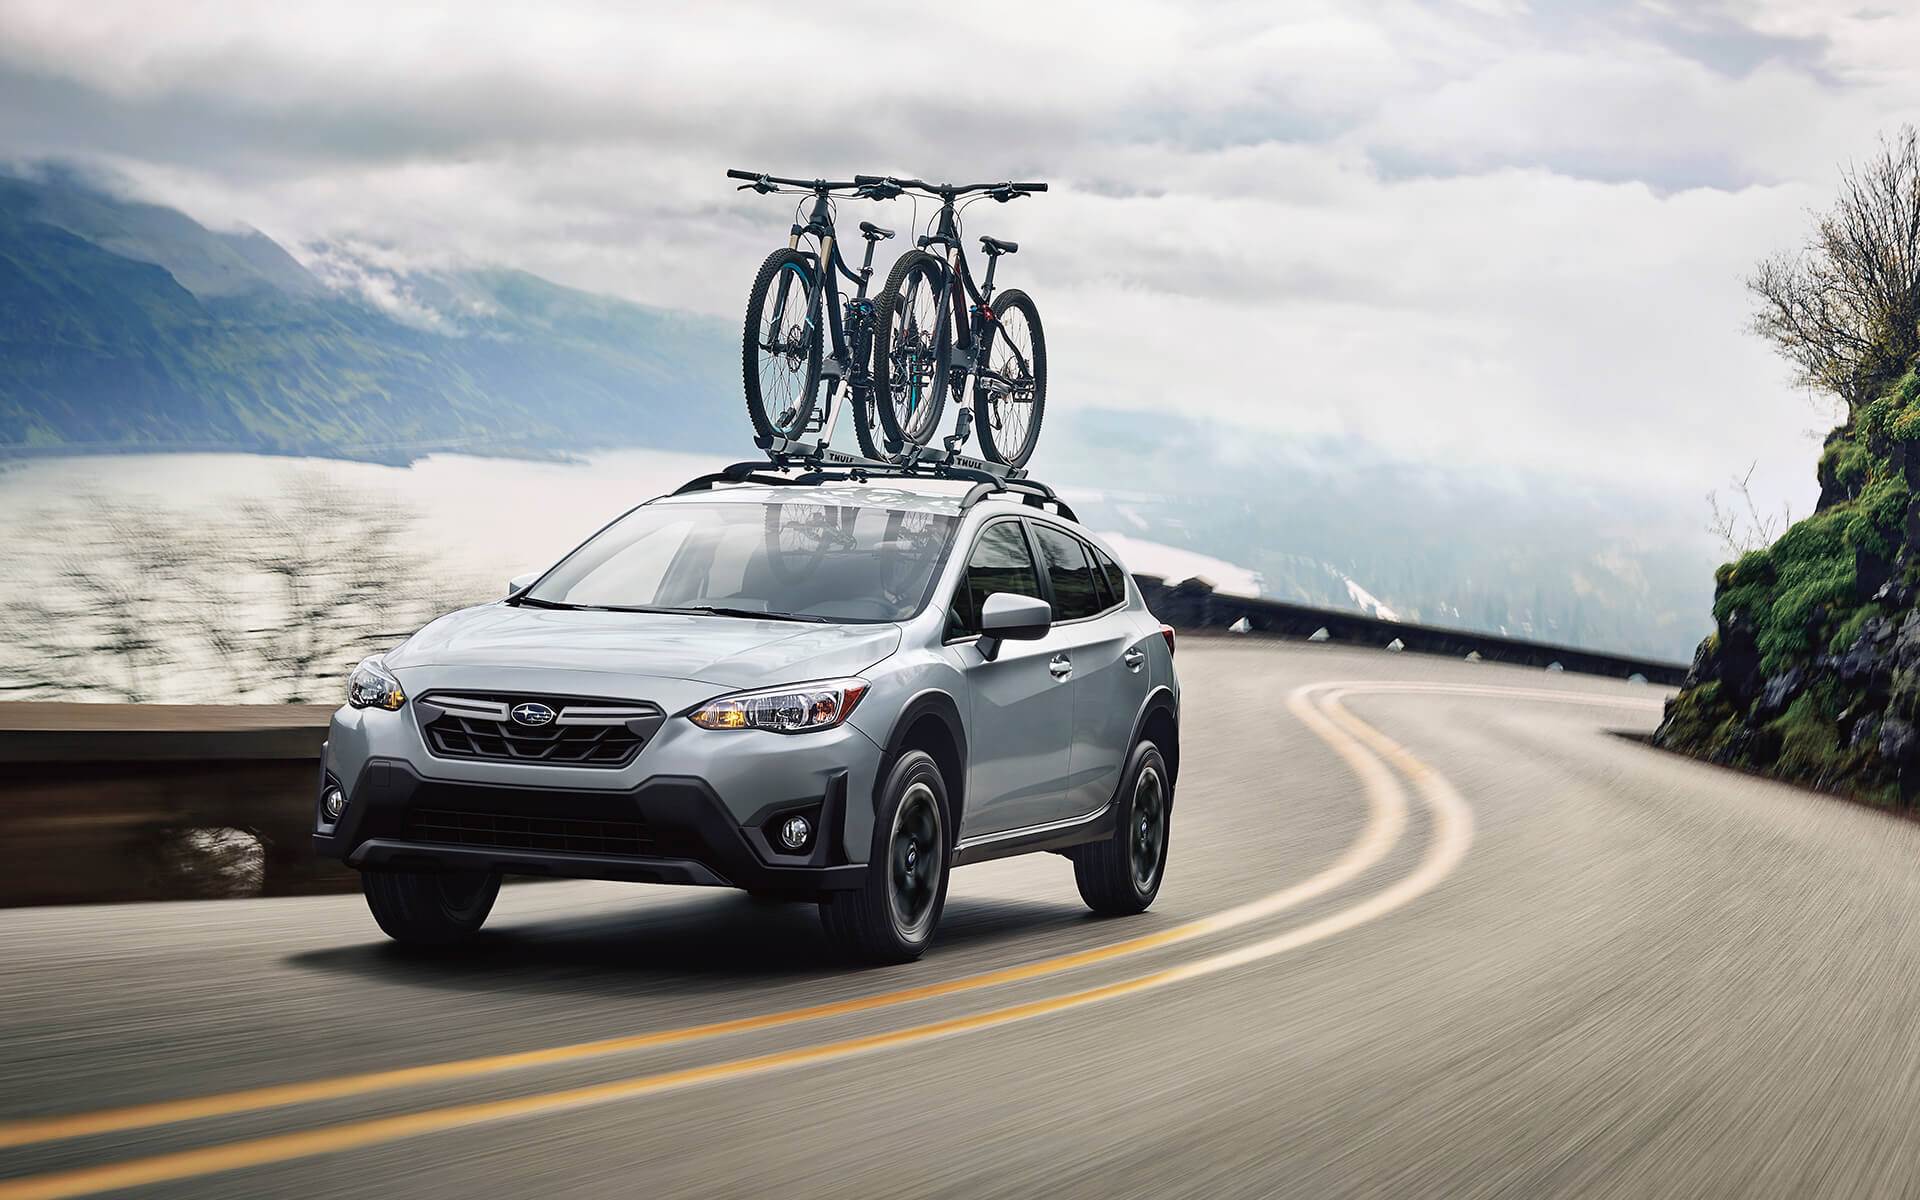 Want the 2022 Subaru Crosstrek’s Quickest Engine? It Doesn’t Offer the Manual Transmission